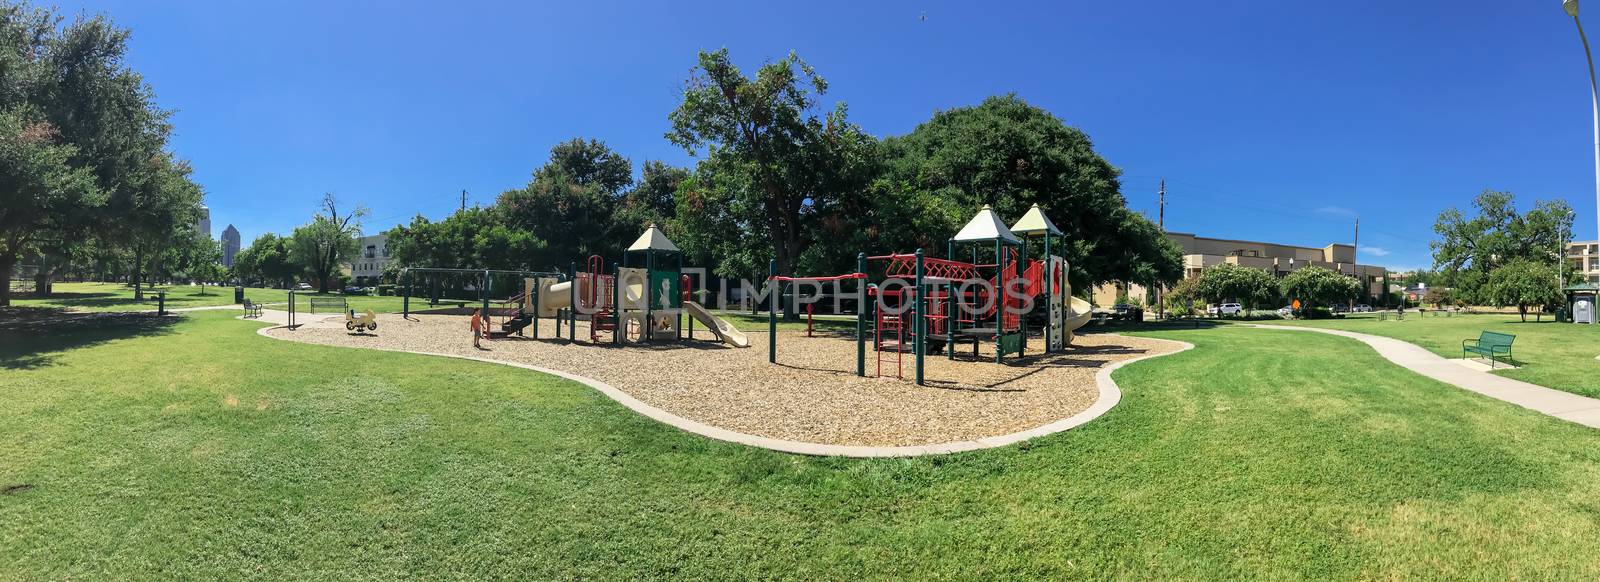 Panoramic urban playground surrounded by large trees and landmarks background in downtown Dallas, Texas, USA by trongnguyen